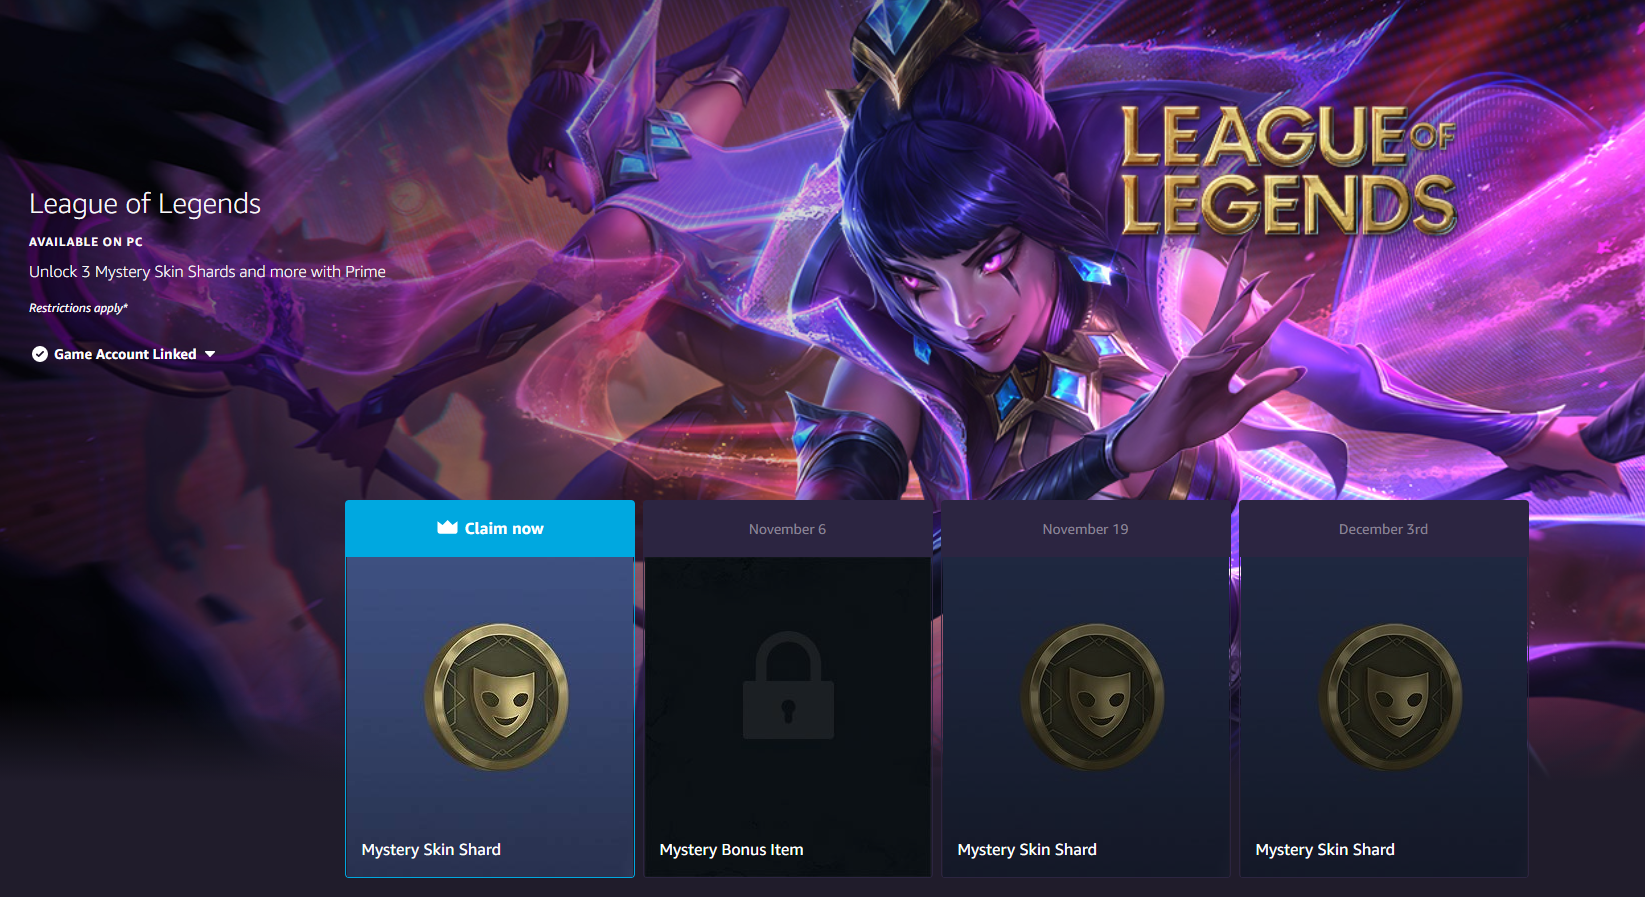 How To Redeem Prime Gaming Rewards In League Of Legends